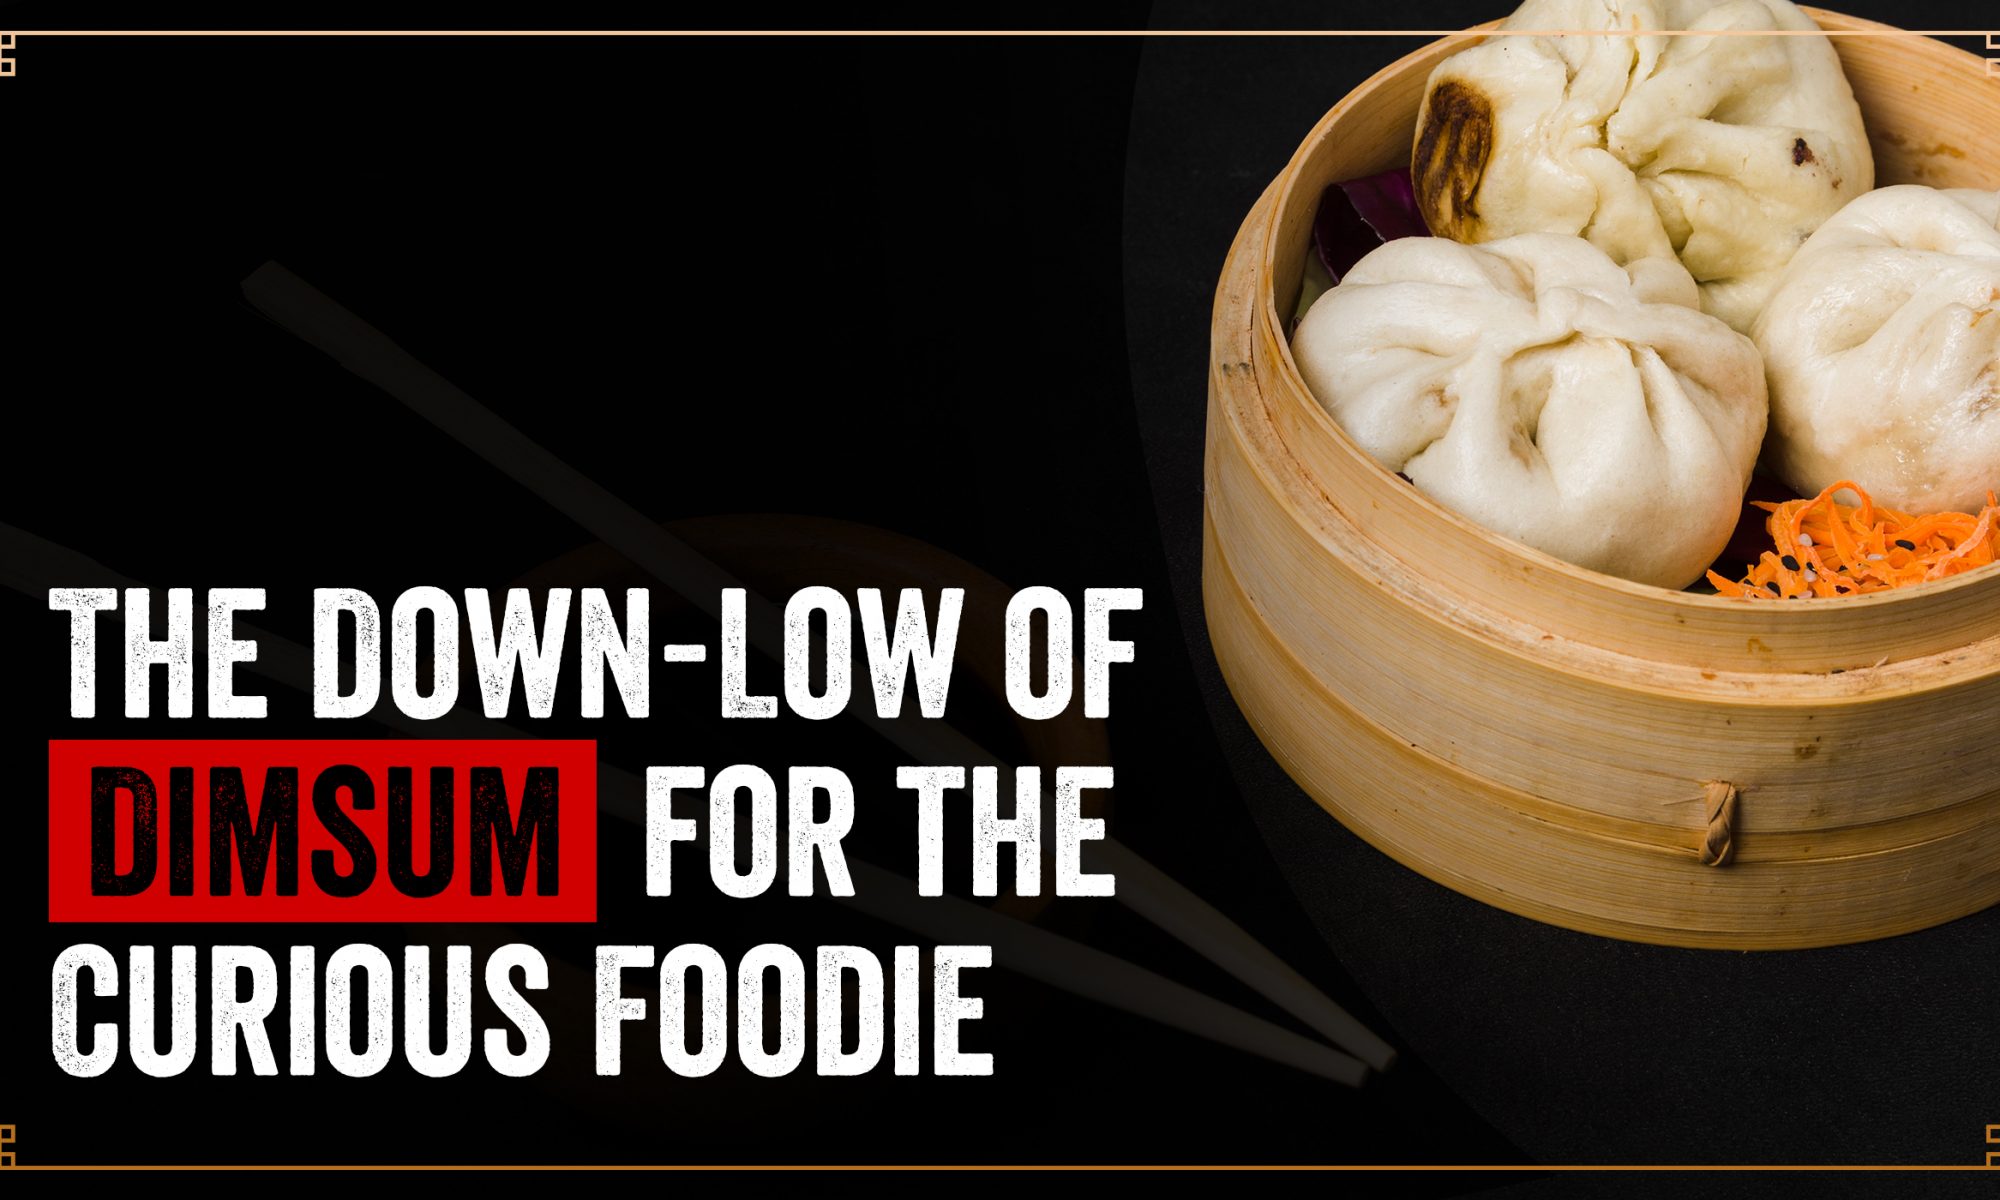 the down-low of dimsum for the foodie